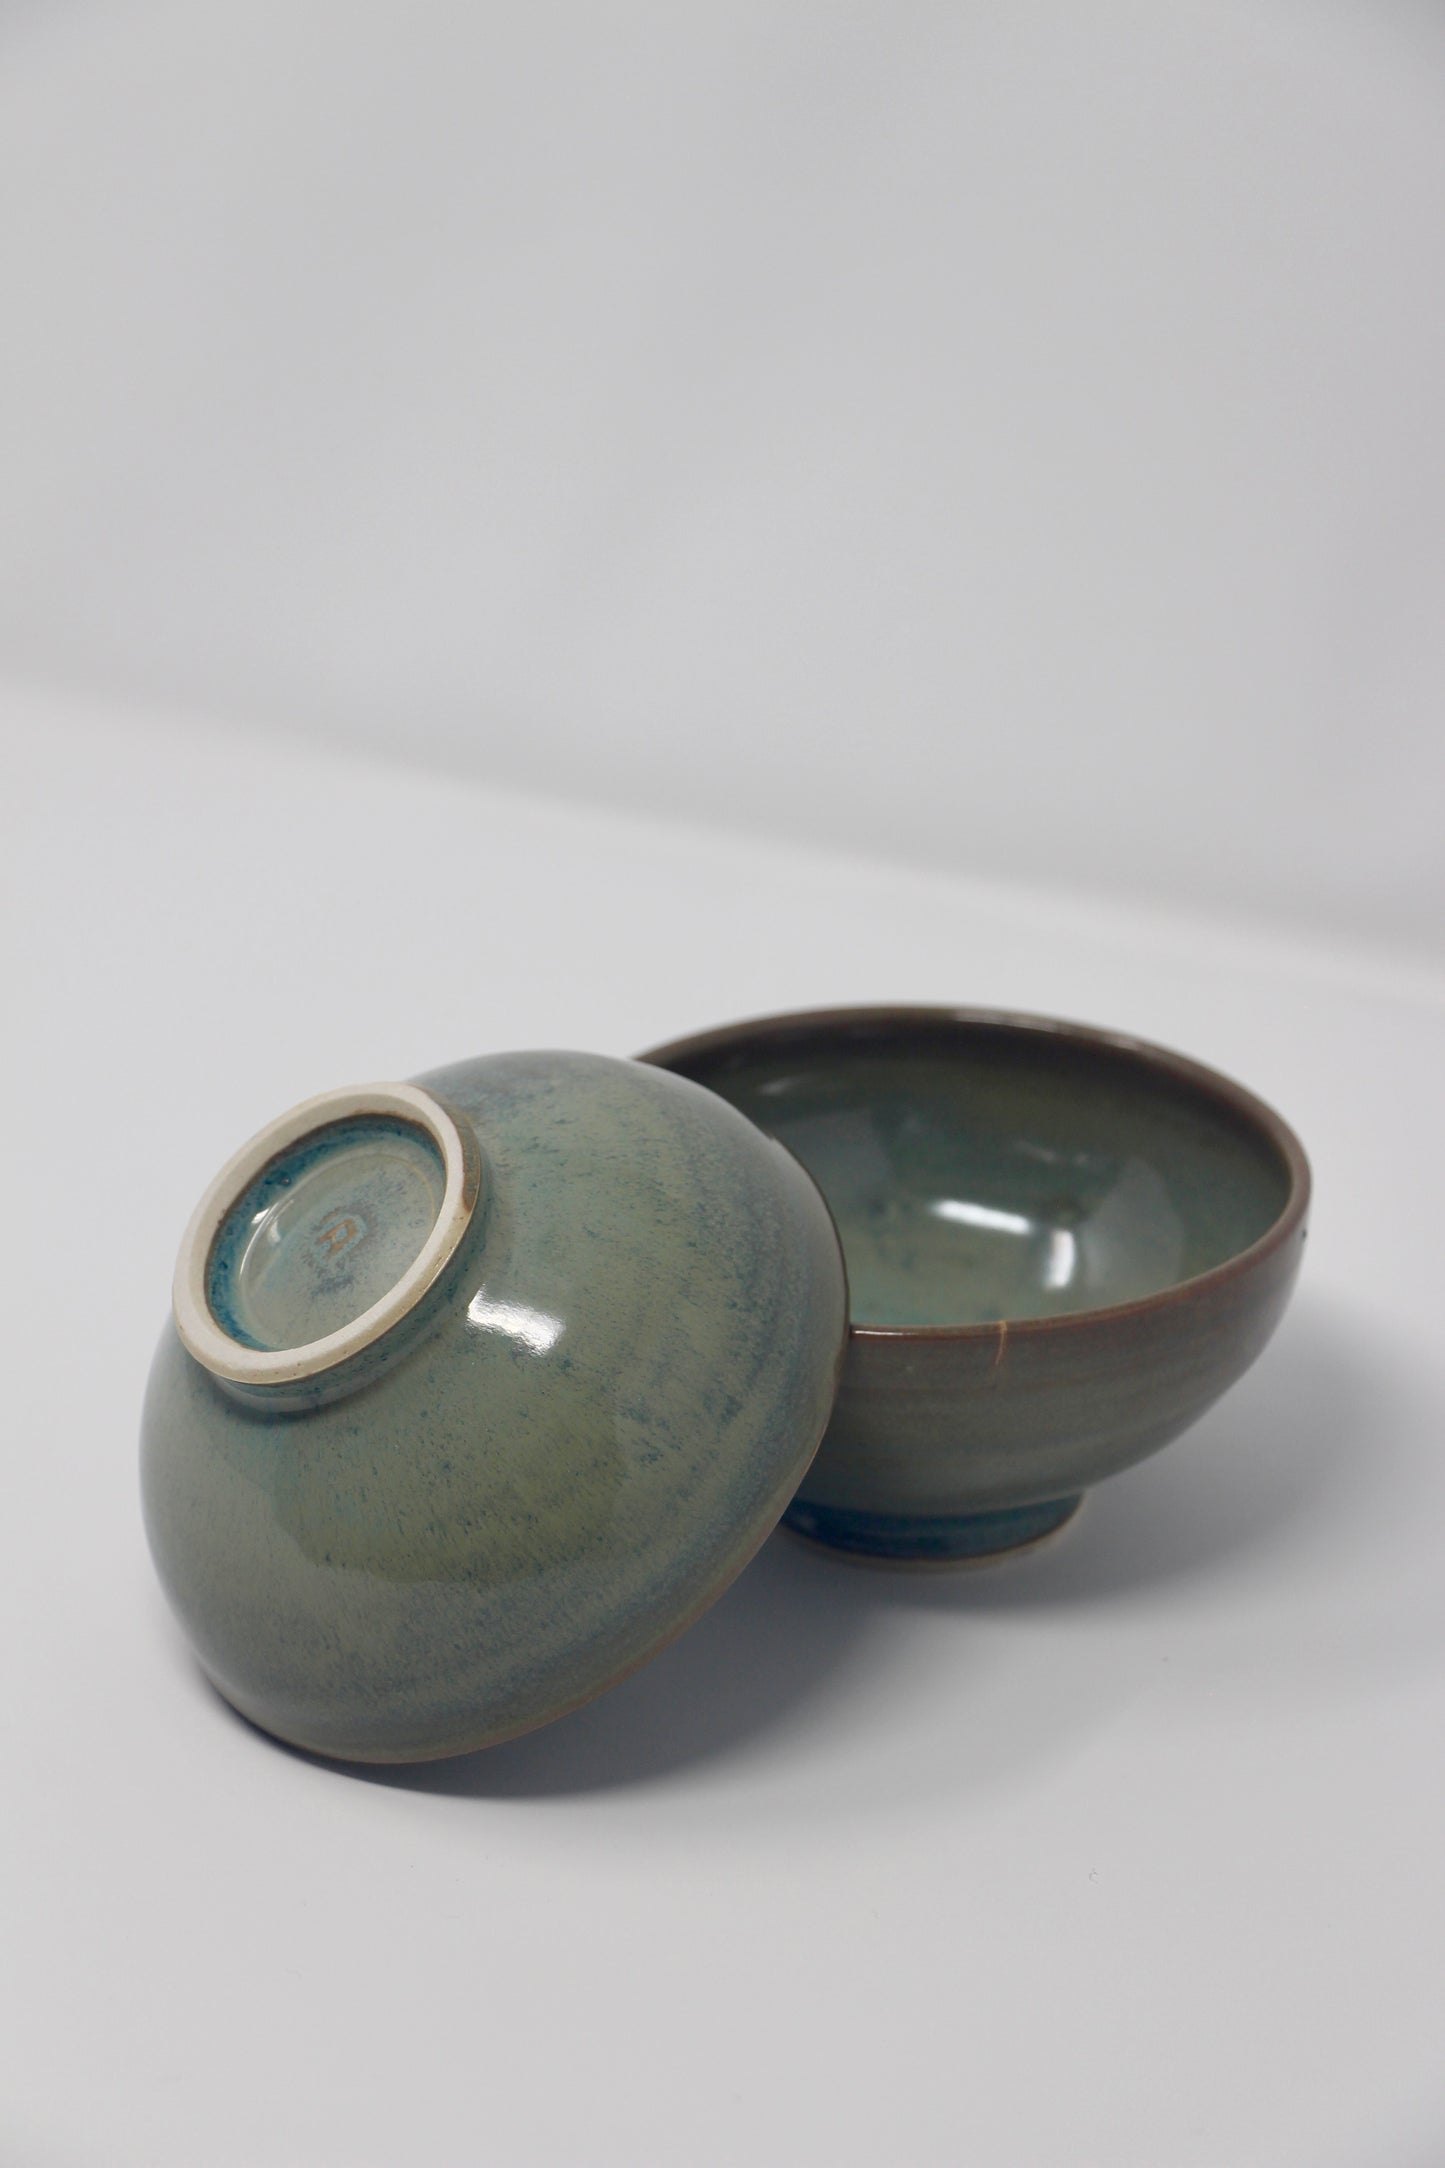 Pair of Little Bowls, Coppernican Sky